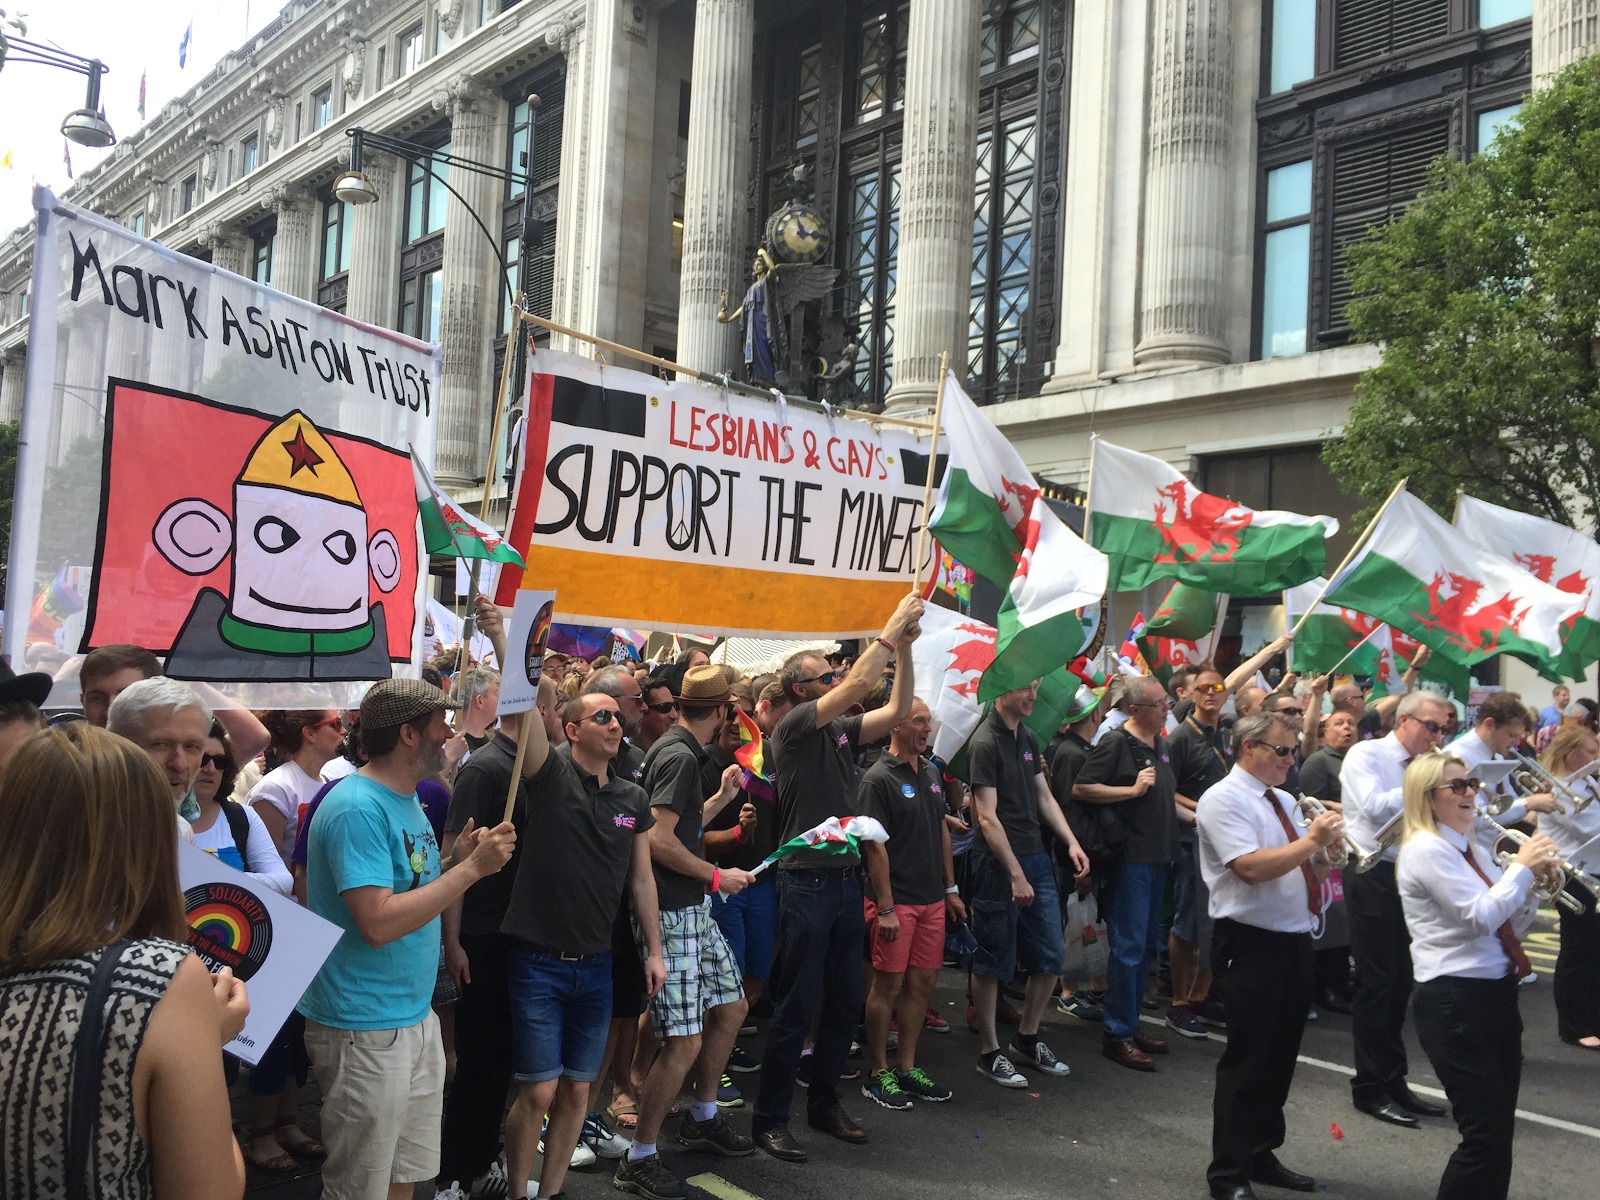 London Pride 2015, LGSM and Welsh miners.